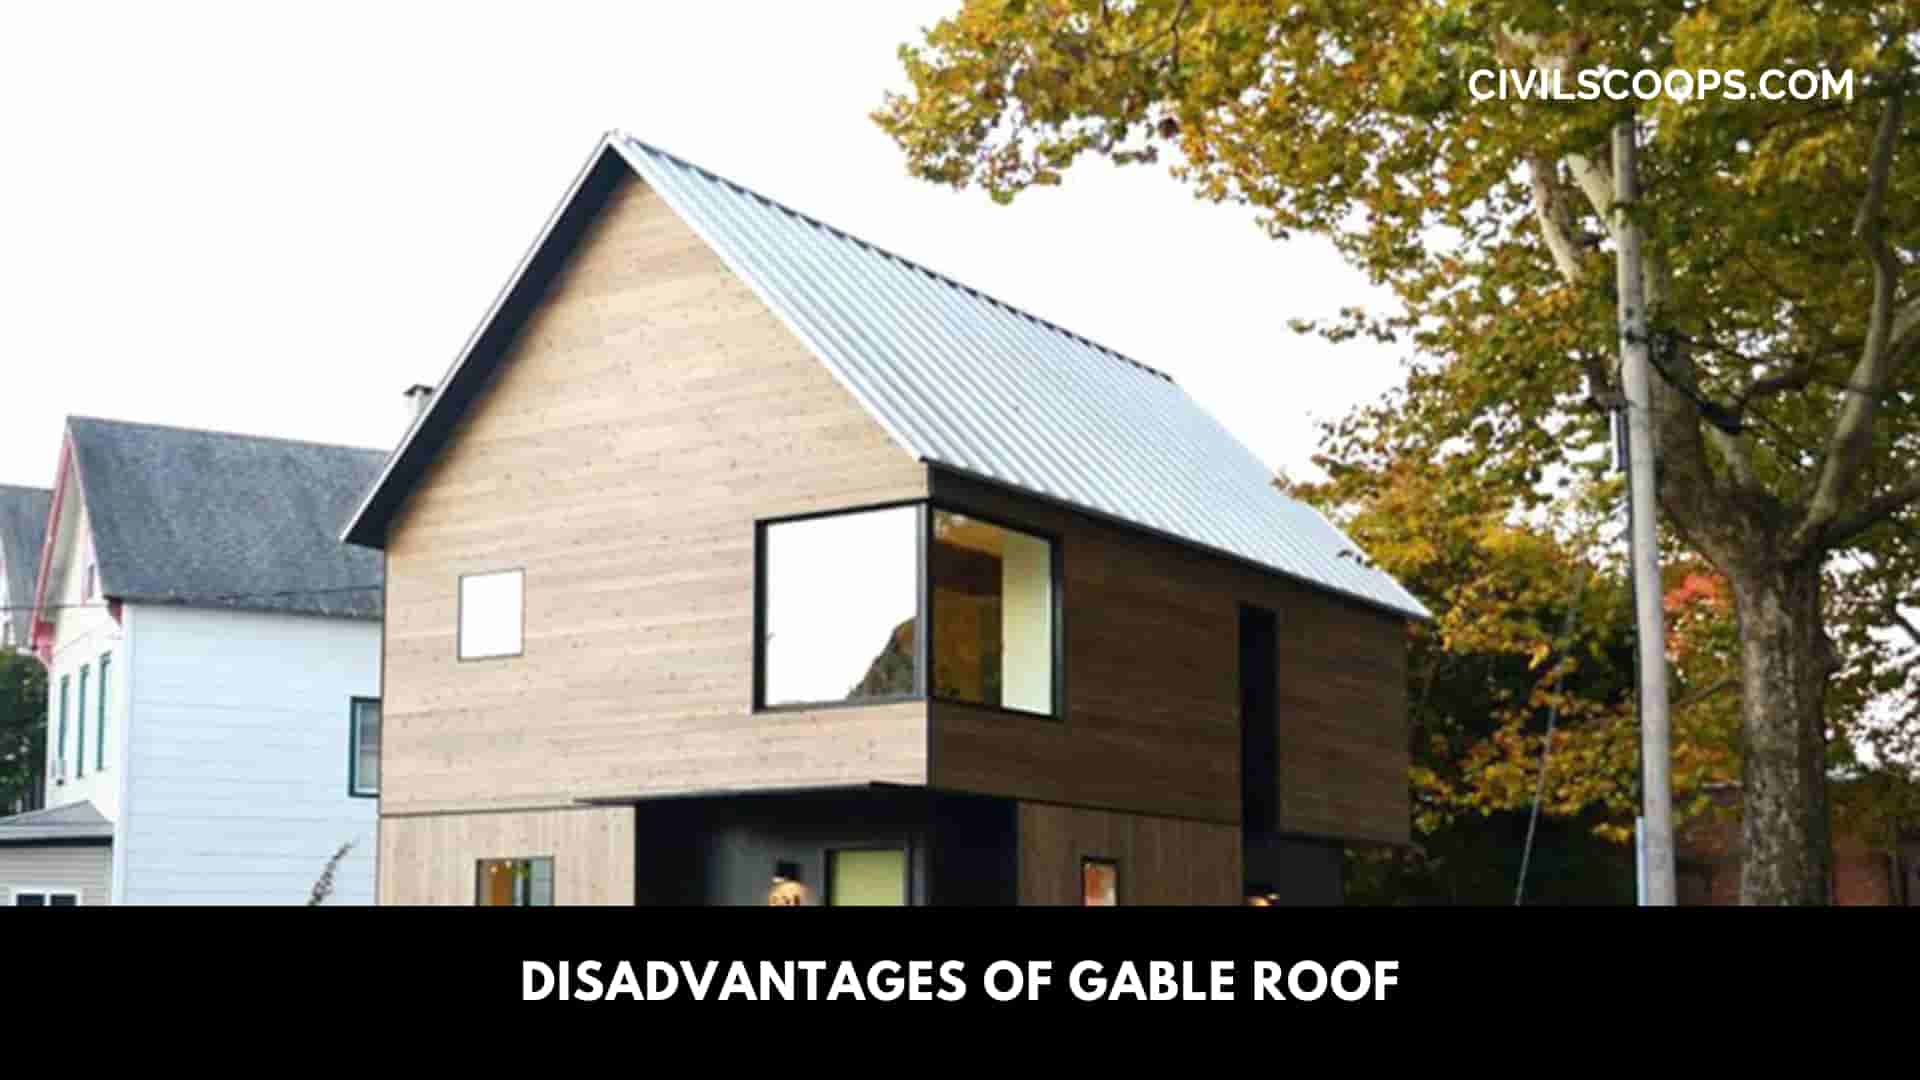 Disadvantages of Gable Roof